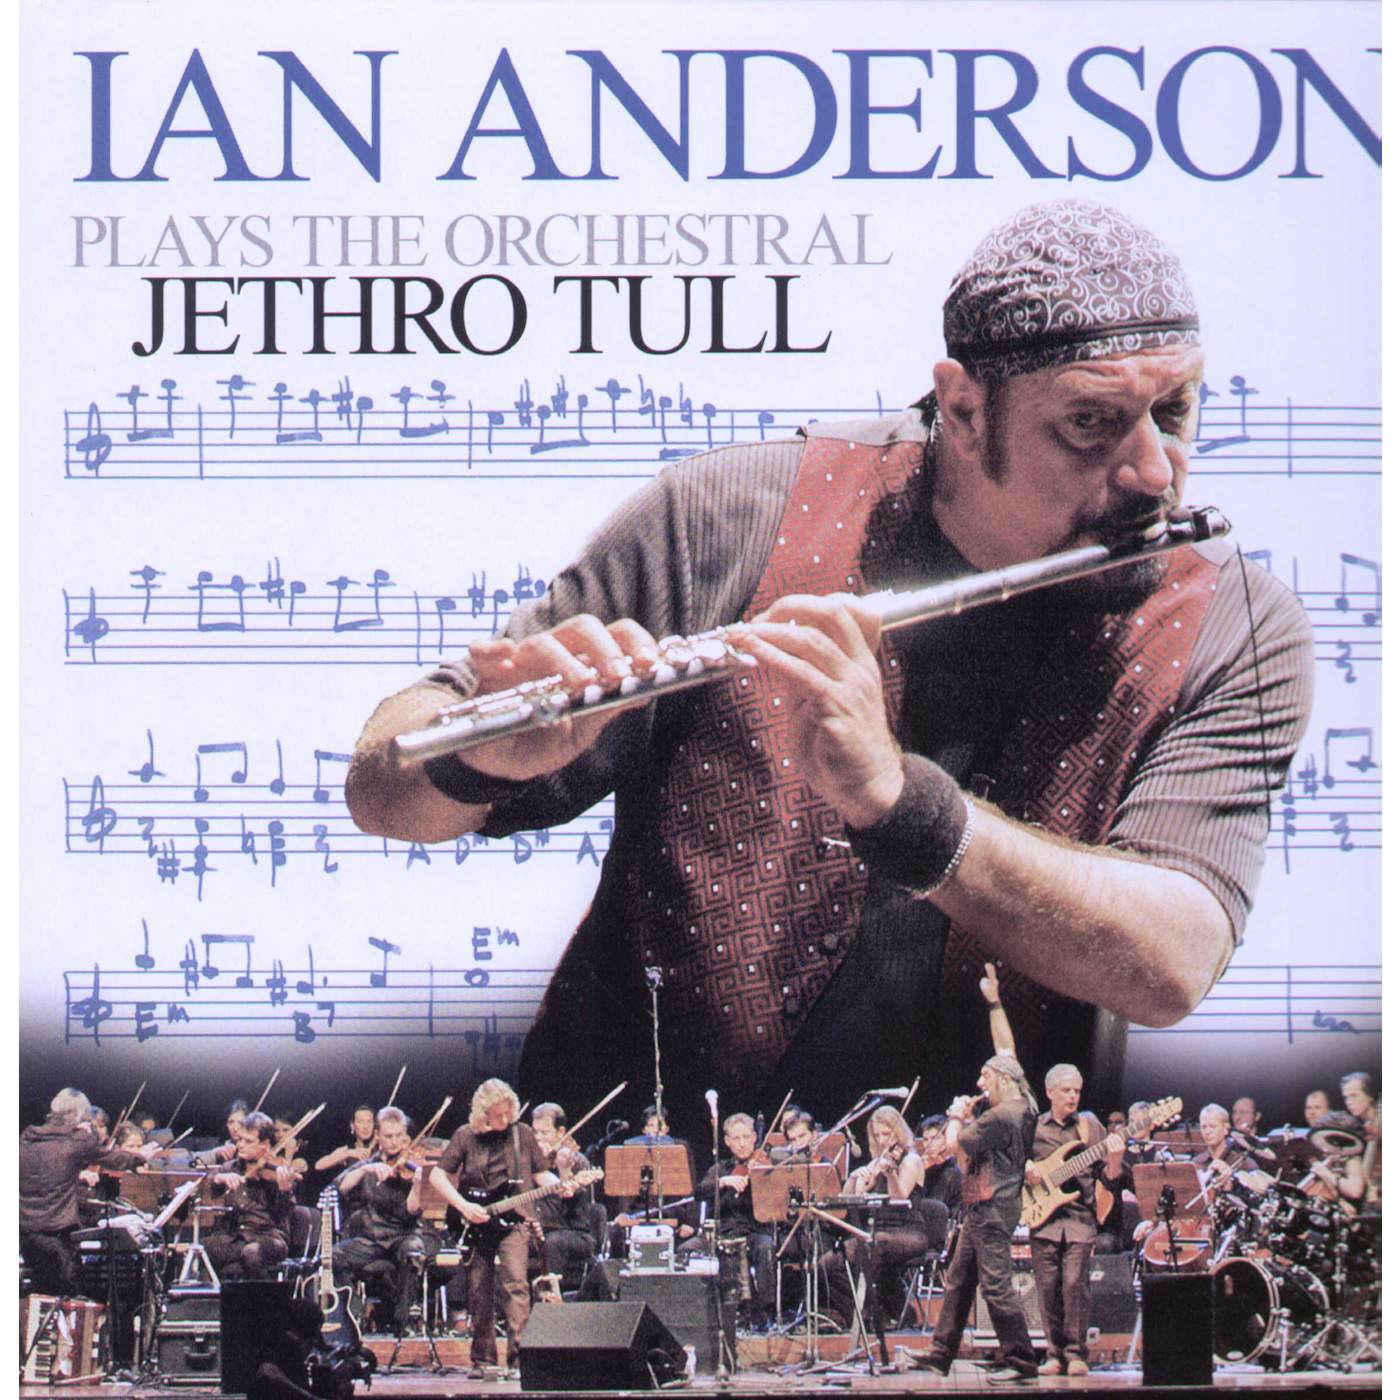 IAN ANDERSON PLAYS THE ORCHESTRAL JETHRO TULL Vinyl Record